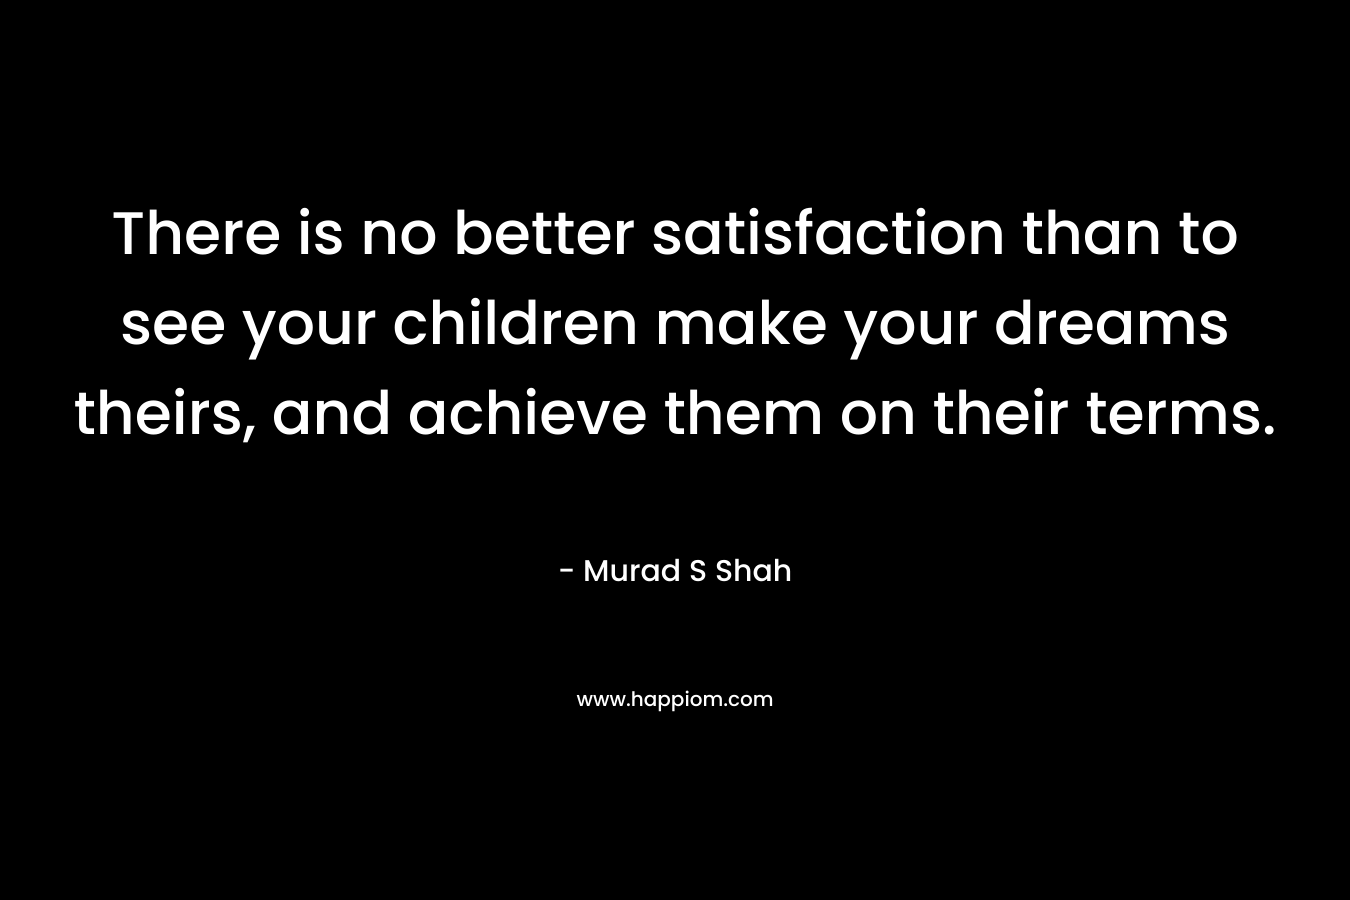 There is no better satisfaction than to see your children make your dreams theirs, and achieve them on their terms.